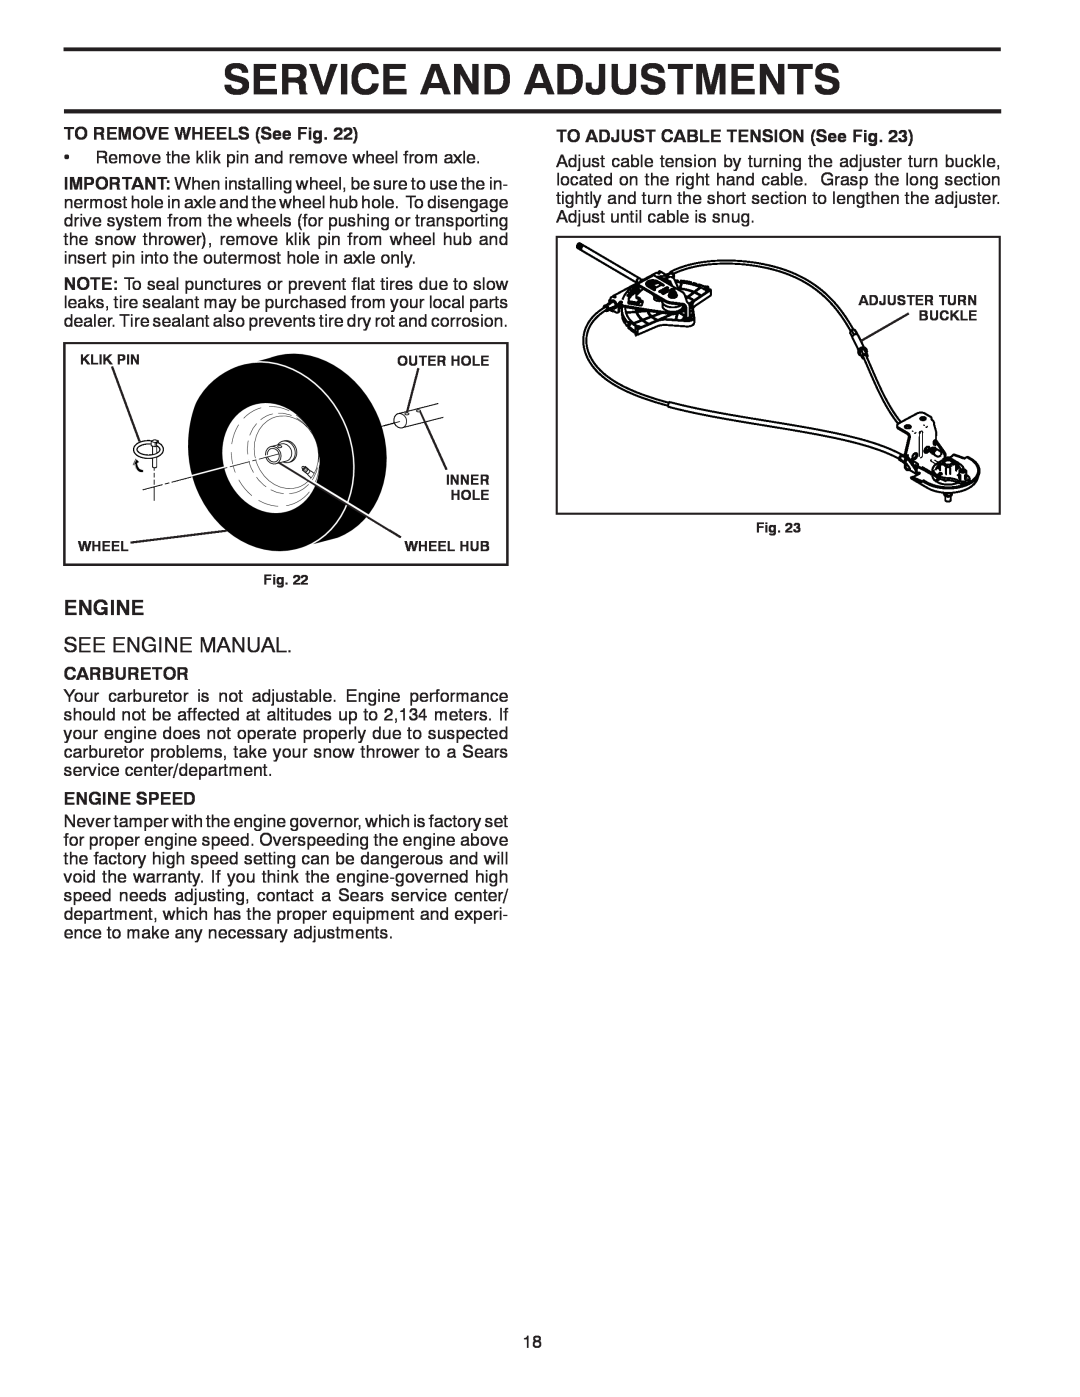 Poulan 435564, 96198003600 See Engine Manual, Service And Adjustments, TO REMOVE WHEELS See Fig, Carburetor, Engine Speed 